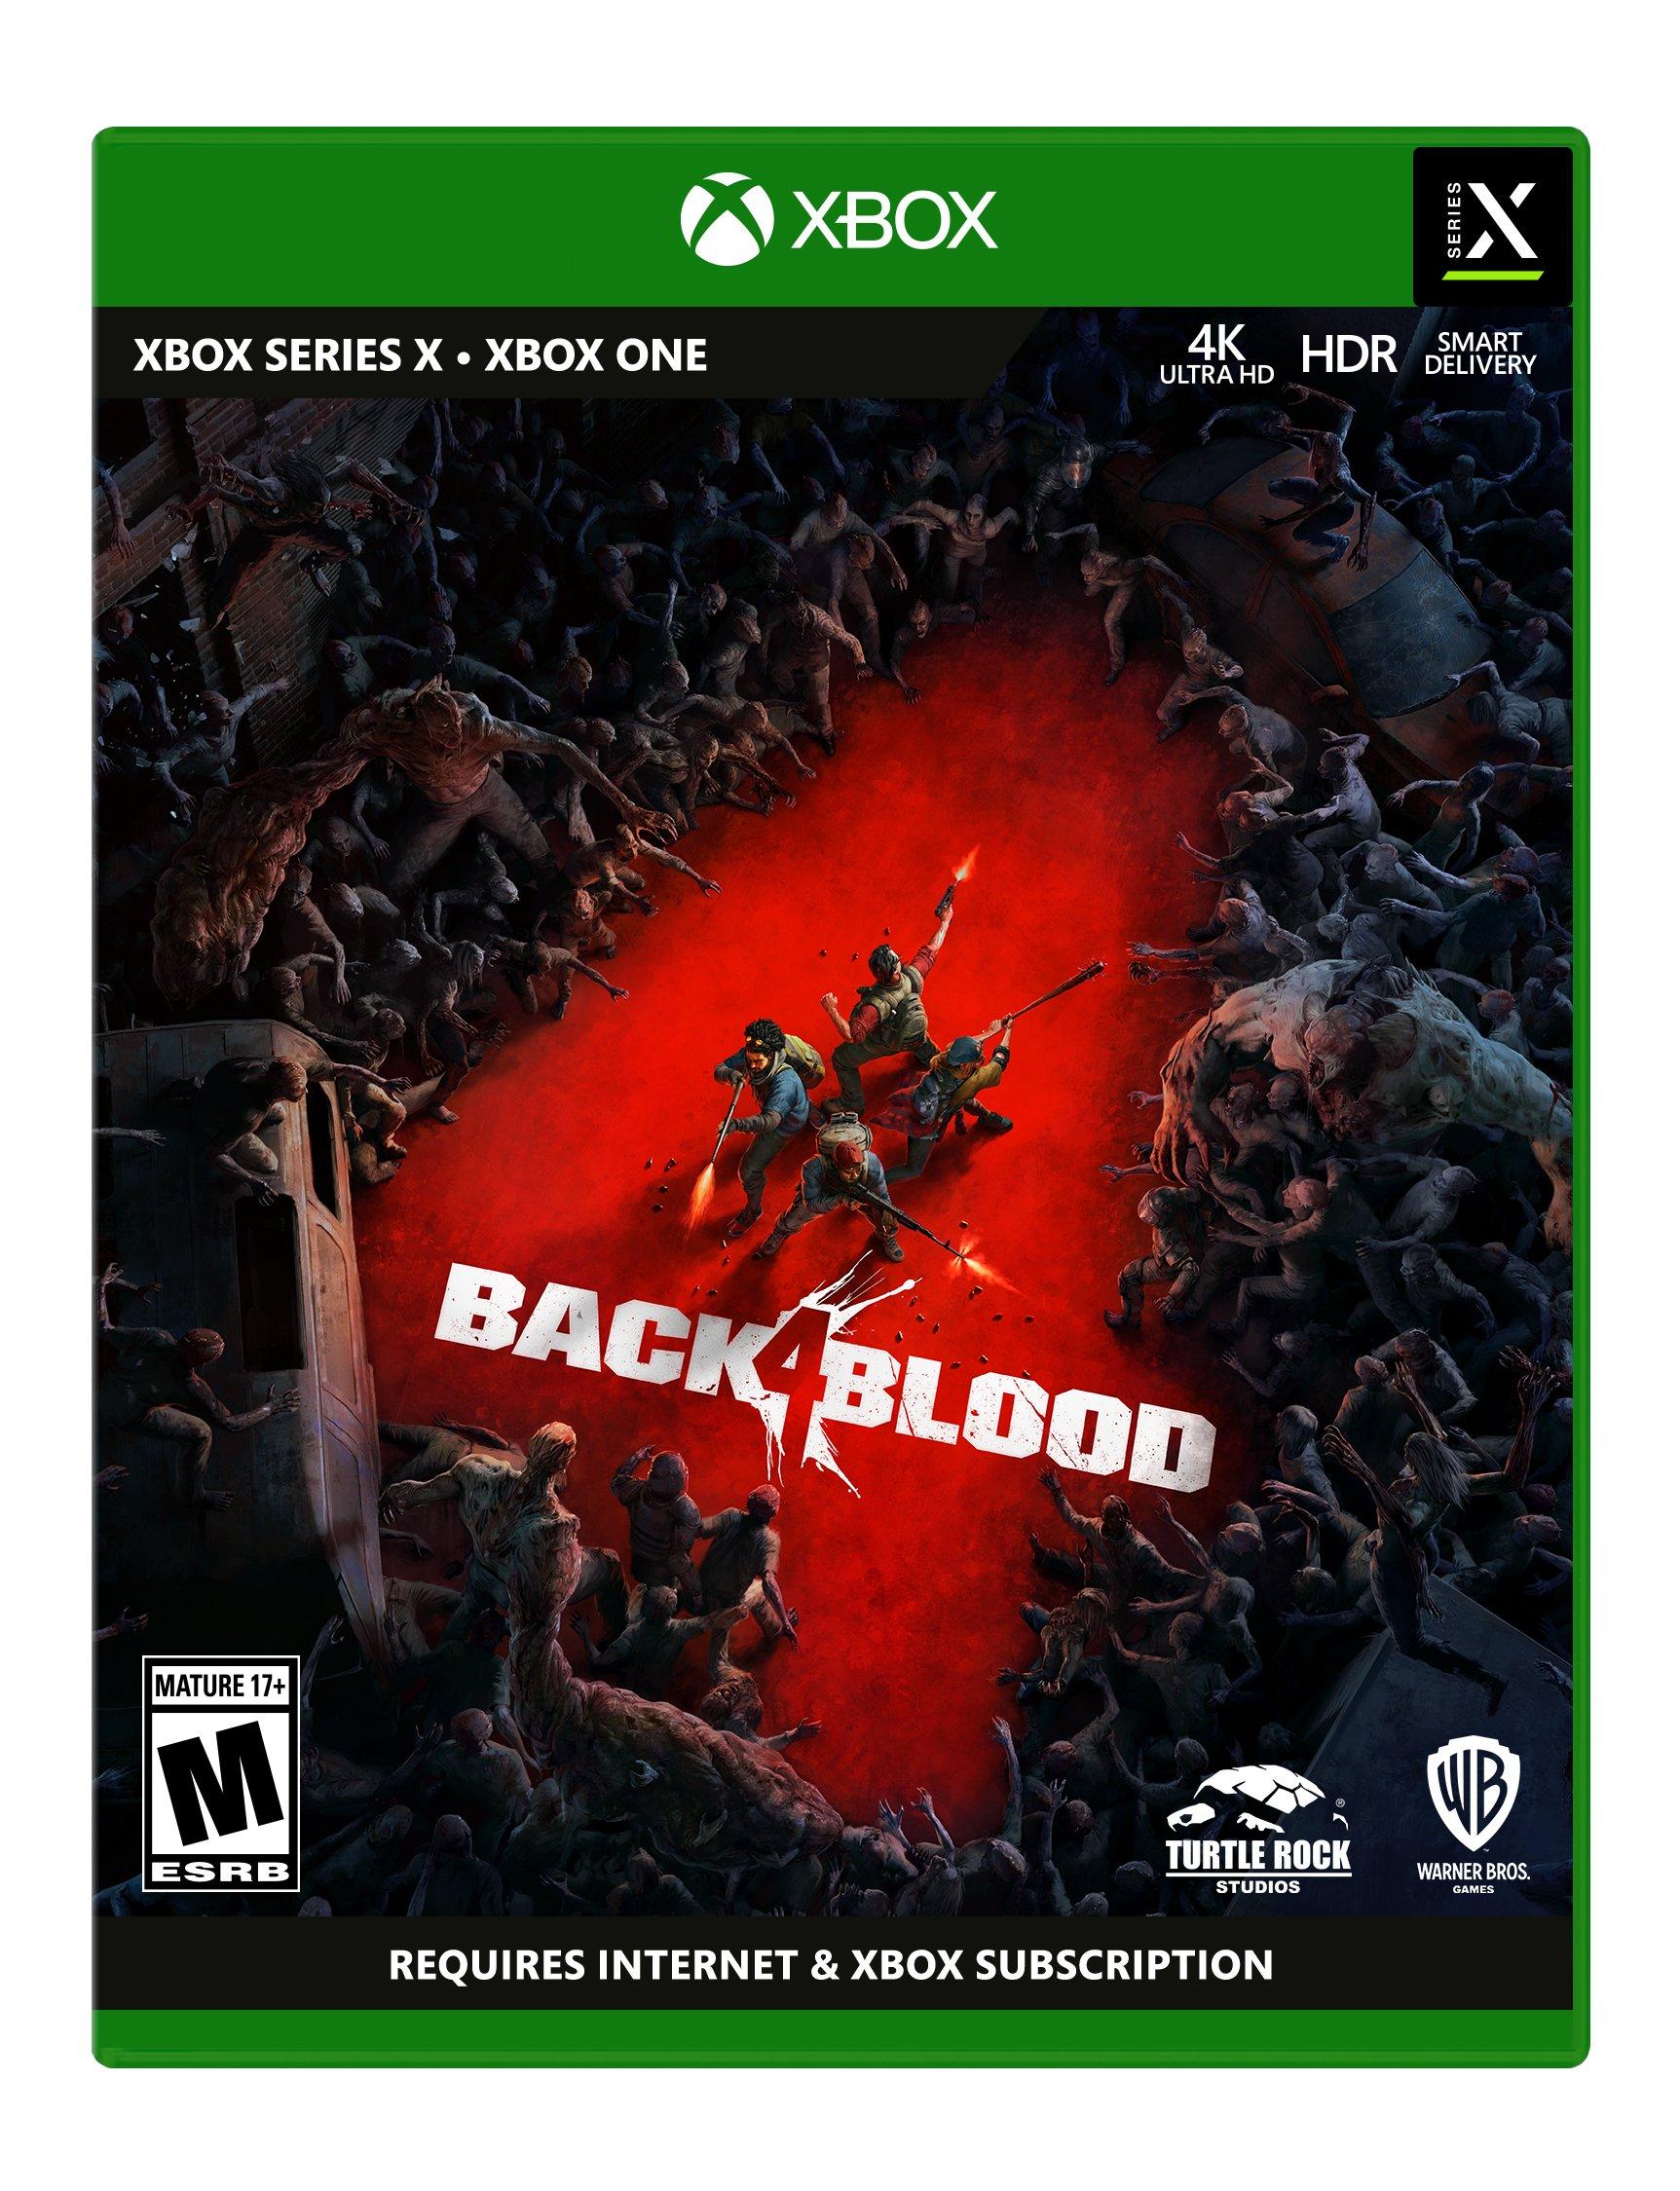 Back 4 Blood coming to Xbox Game Pass at launch on October 12th - The Verge